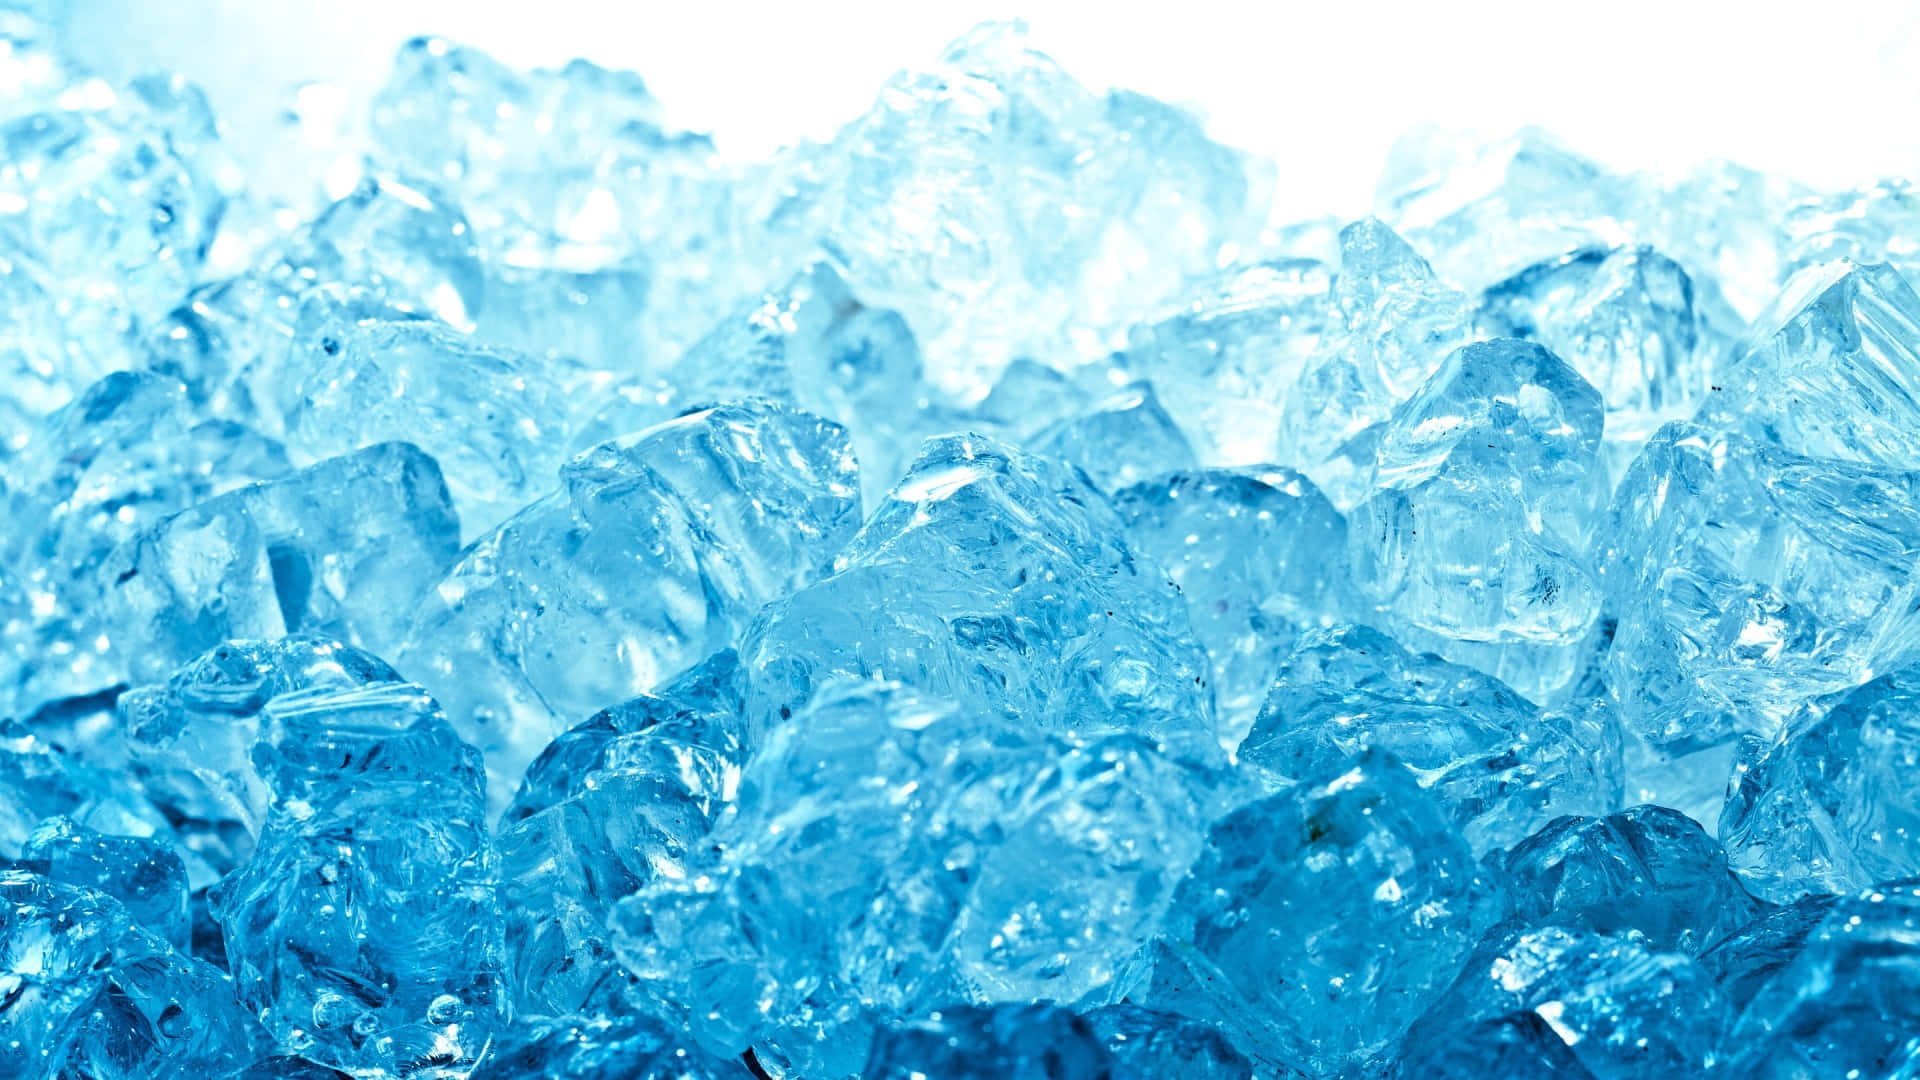 Chill out with ice-blue colors